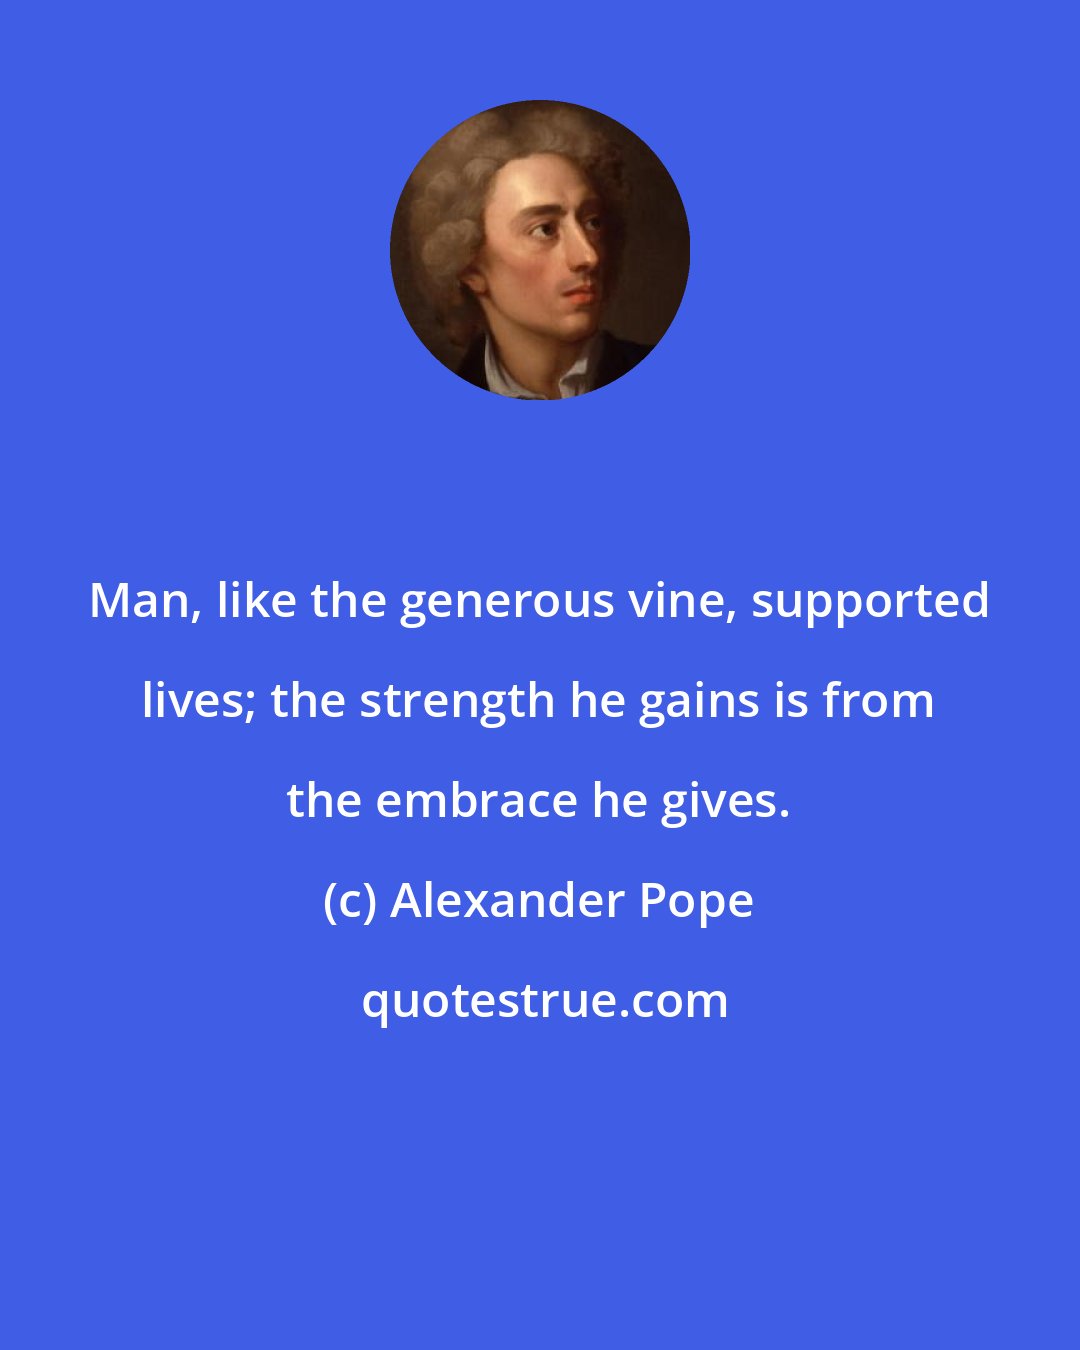 Alexander Pope: Man, like the generous vine, supported lives; the strength he gains is from the embrace he gives.